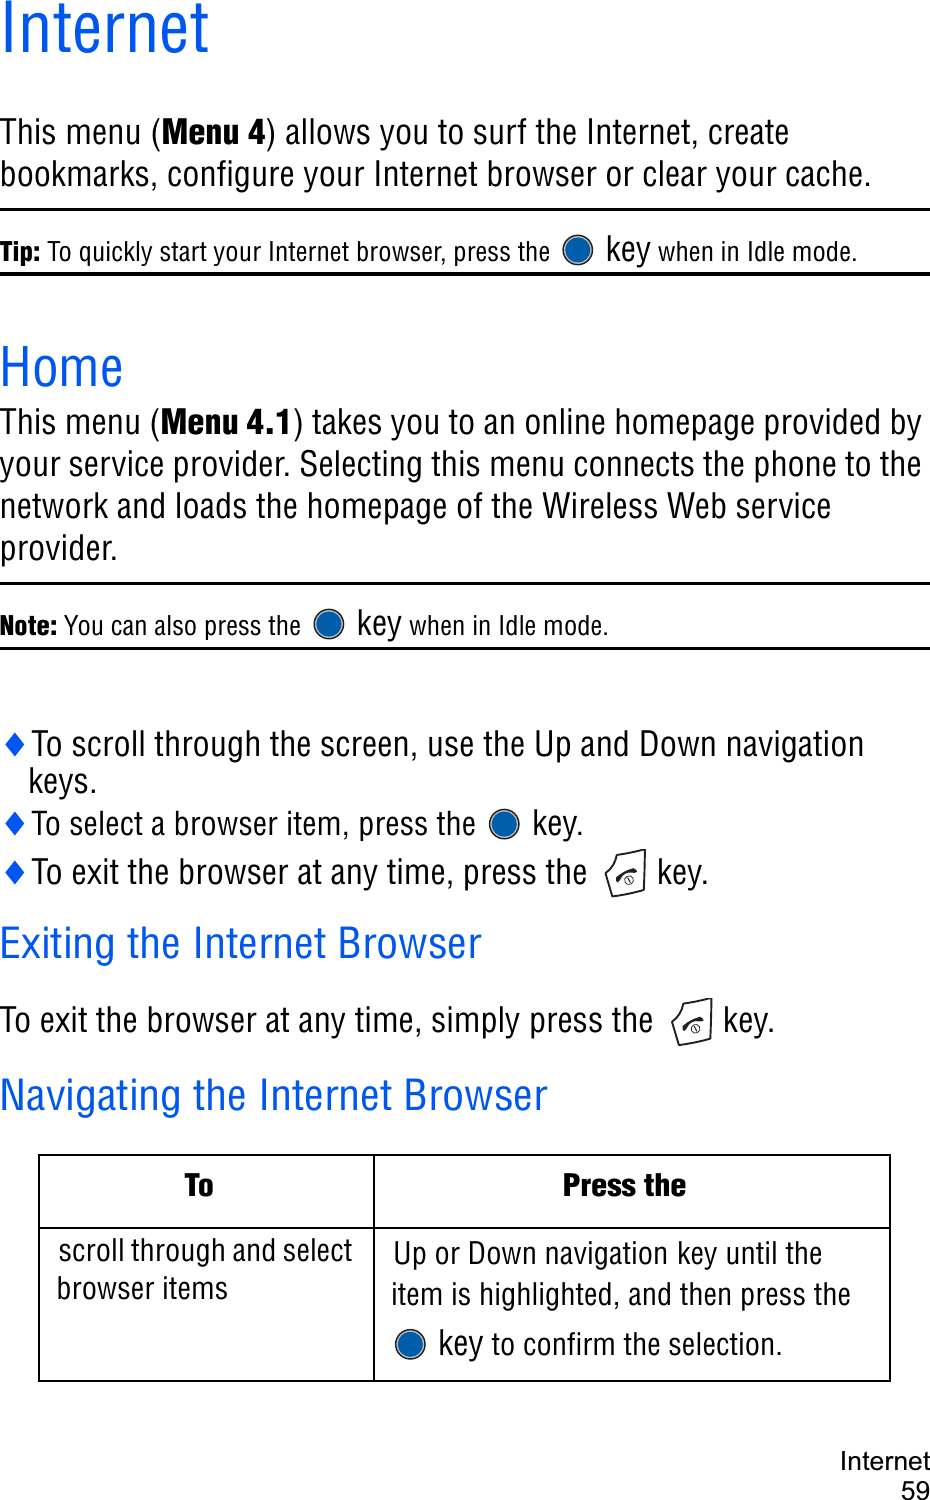 Internet59InternetThis menu (Menu 4) allows you to surf the Internet, create bookmarks, configure your Internet browser or clear your cache.Tip: To quickly start your Internet browser, press the  key when in Idle mode.HomeThis menu (Menu 4.1) takes you to an online homepage provided by your service provider. Selecting this menu connects the phone to the network and loads the homepage of the Wireless Web service provider. Note: You can also press the  key when in Idle mode.iTo scroll through the screen, use the Up and Down navigation keys.iTo select a browser item, press the  key.iTo exit the browser at any time, press the   key.Exiting the Internet BrowserTo exit the browser at any time, simply press the   key.Navigating the Internet BrowserTo Press thescroll through and select browser itemsUp or Down navigation key until the item is highlighted, and then press the key to confirm the selection.